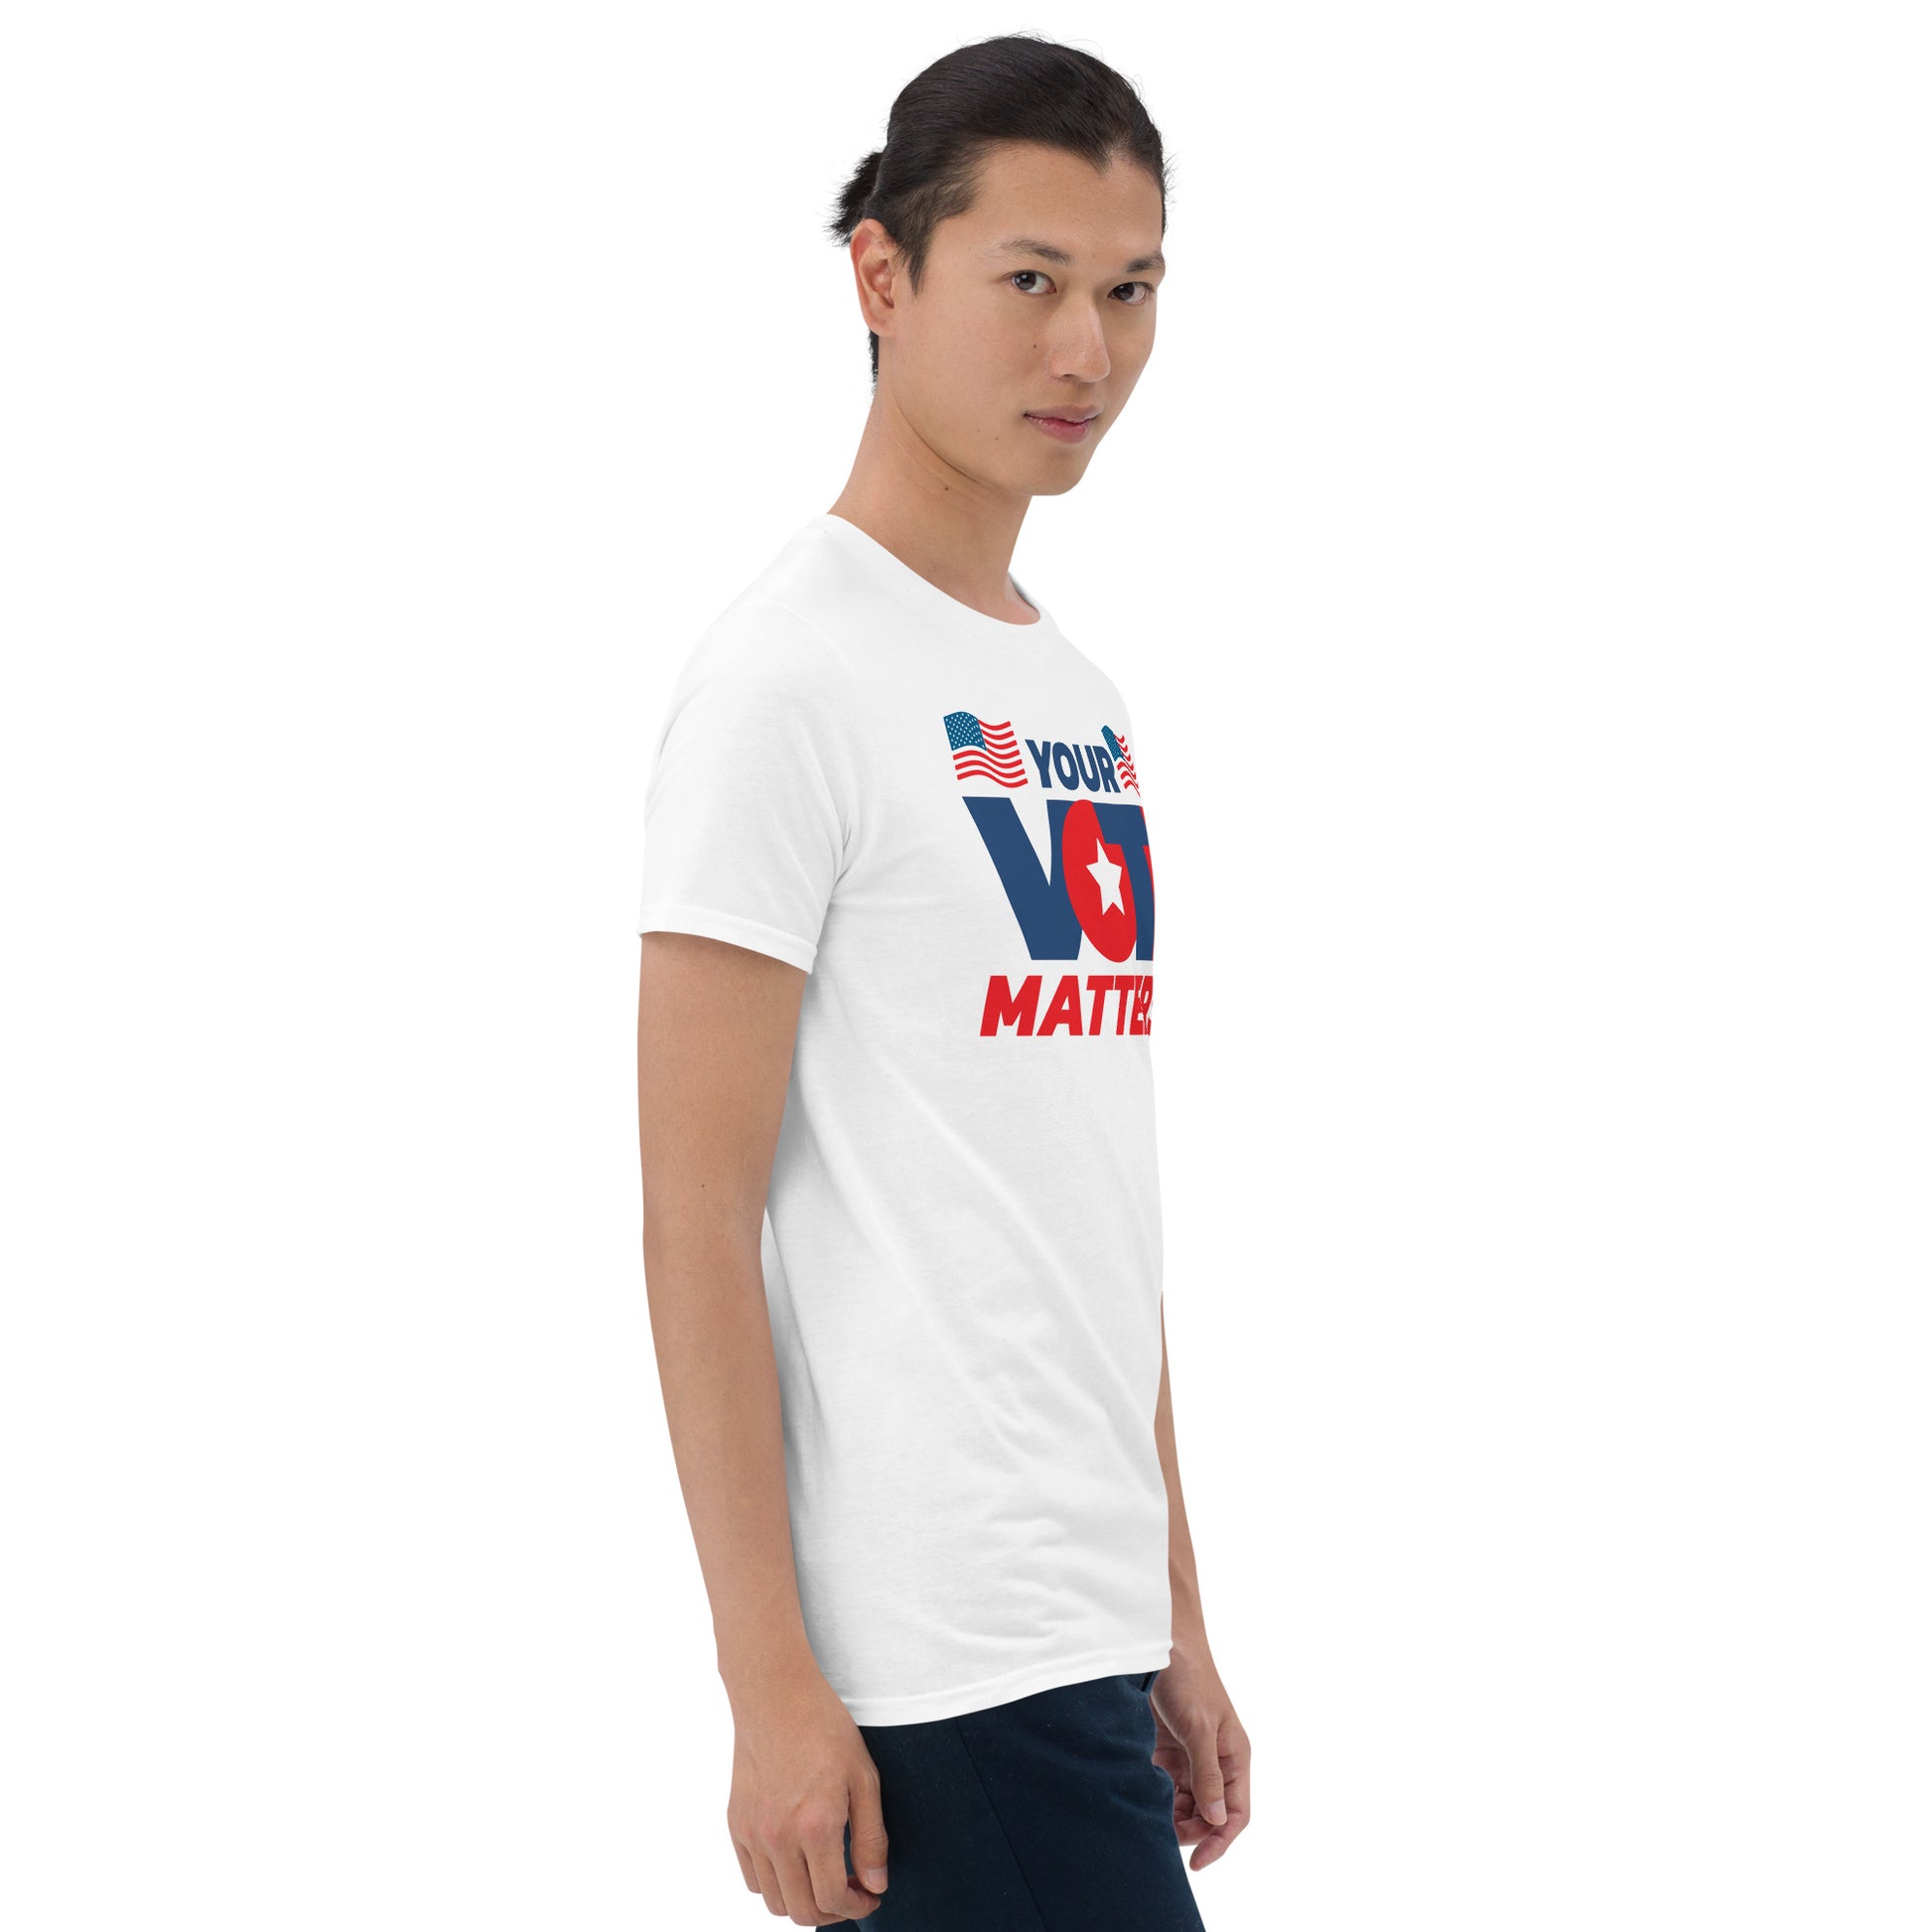 USA Election Apparel: Wear Your Civic Duty